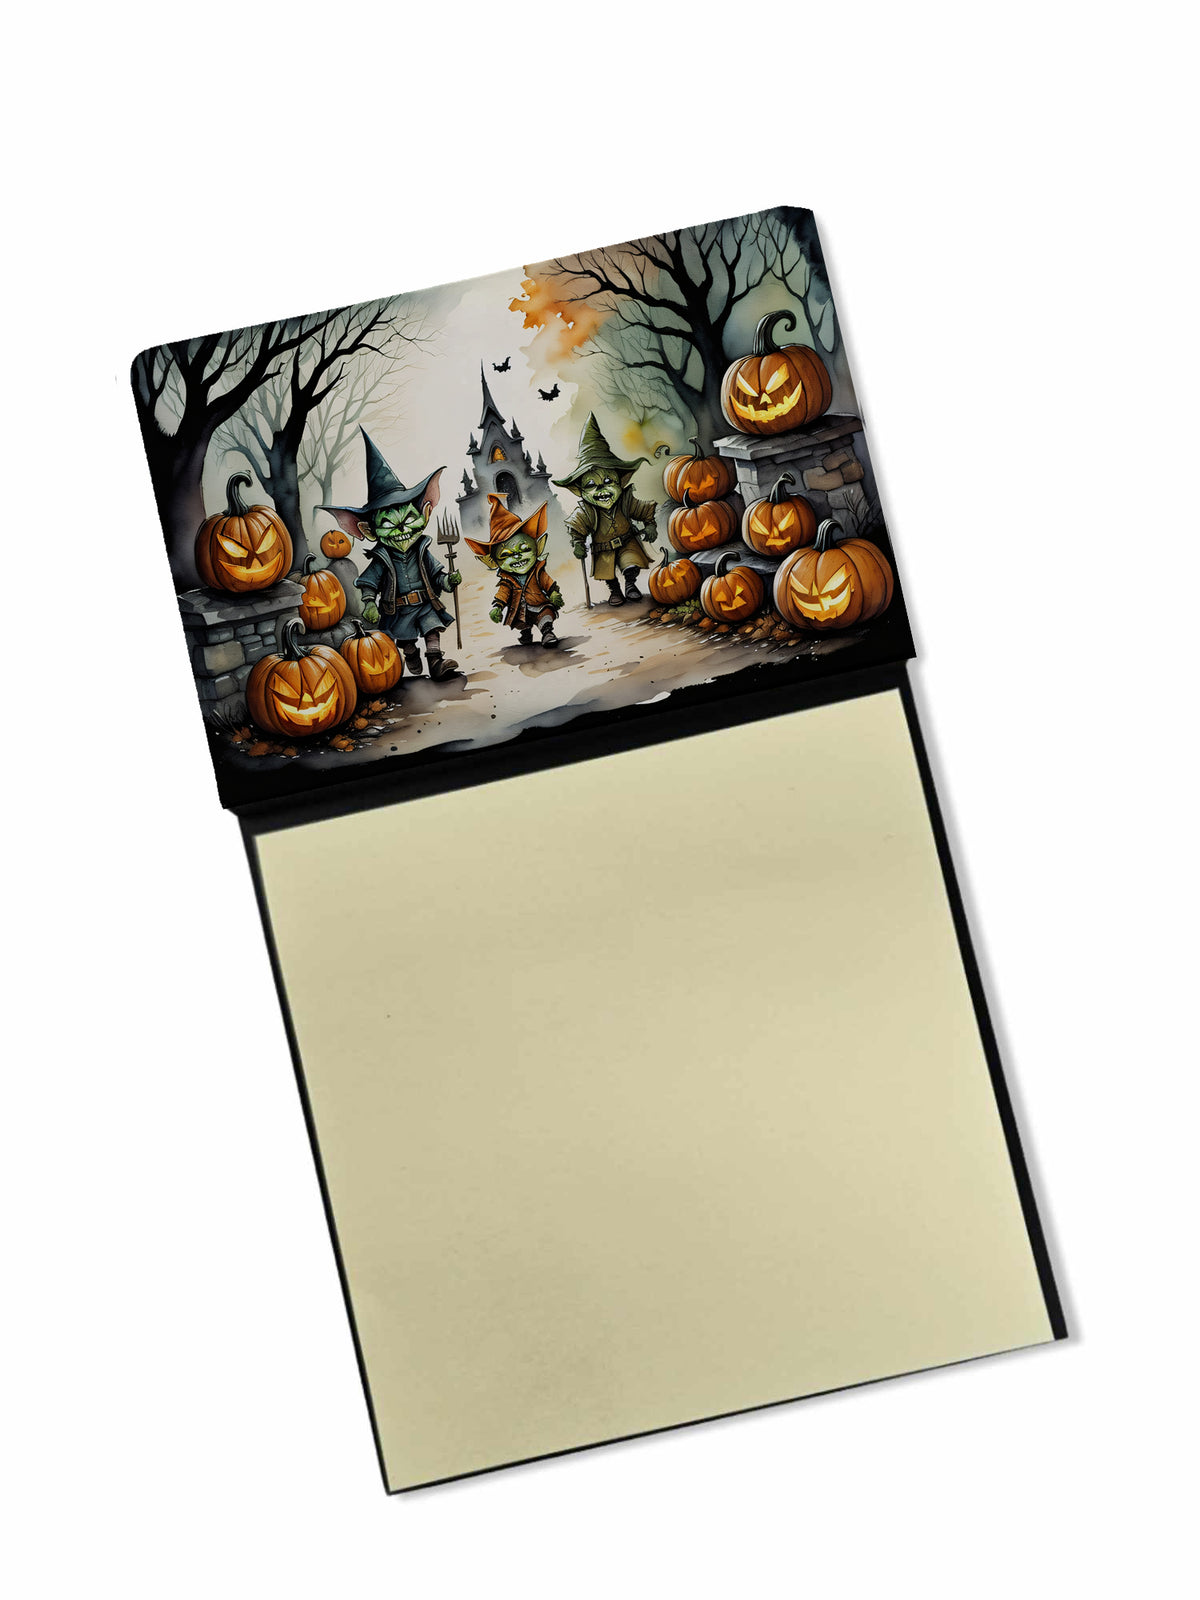 Buy this Goblins Spooky Halloween Sticky Note Holder